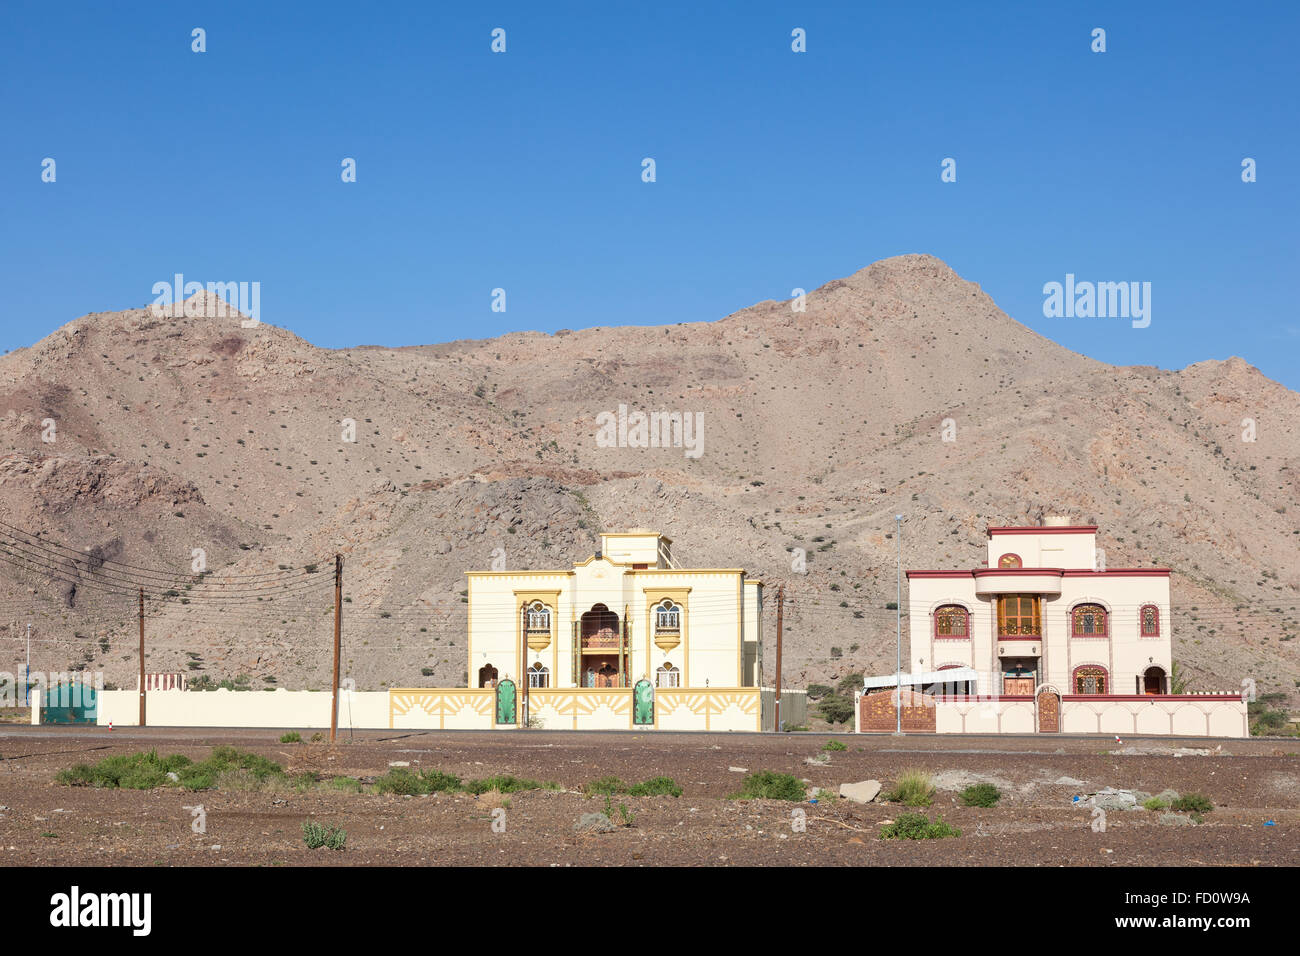 Residential houses in Oman Stock Photo